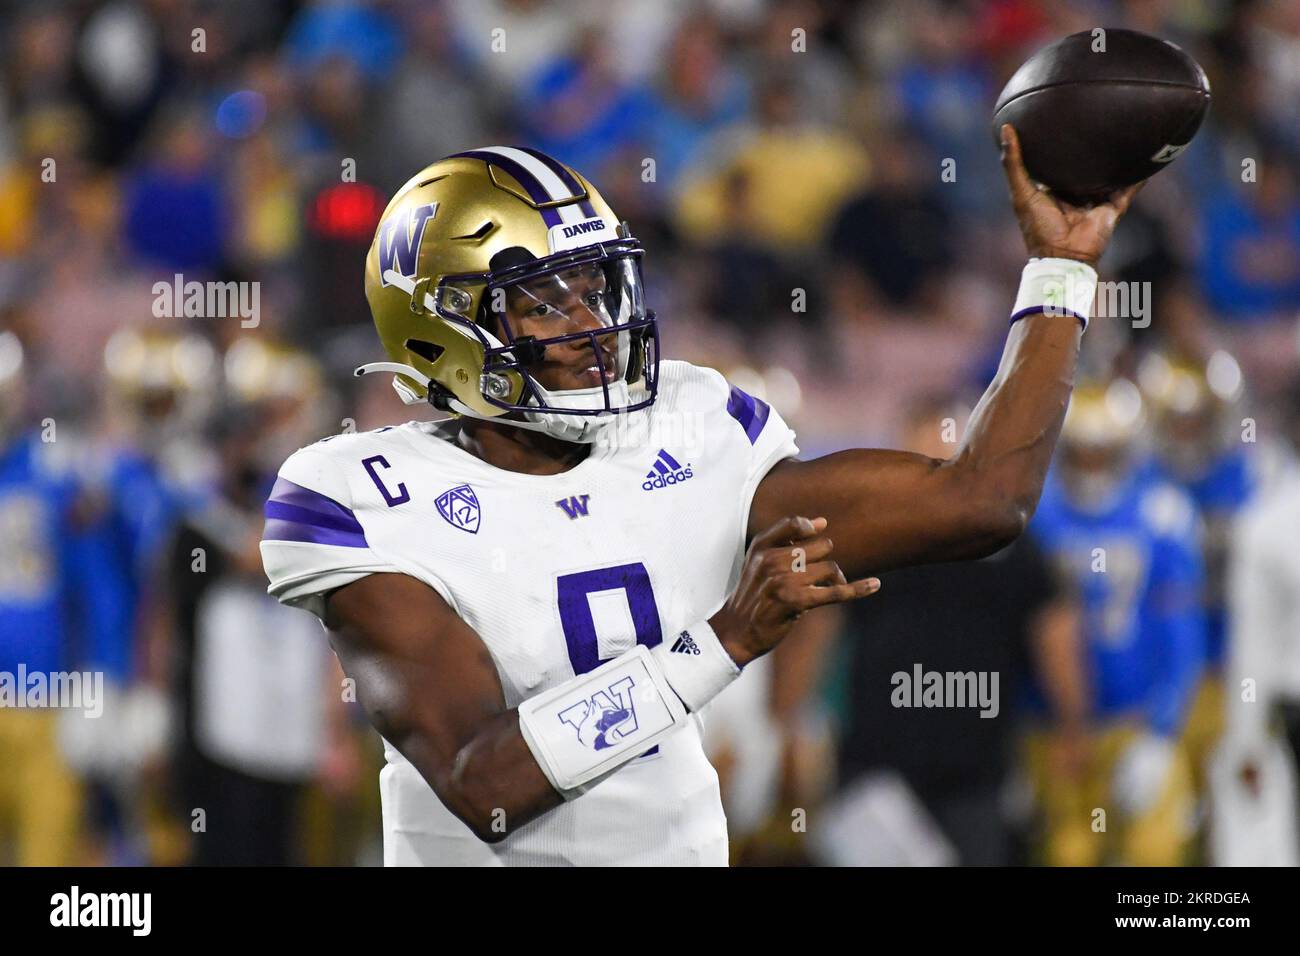 Washington Huskies quarterback Michael Penix Jr. (9) throws the ball during an NCAA football game against the UCLA Bruins, Friday, Sep. 30, 2022, in P Stock Photo